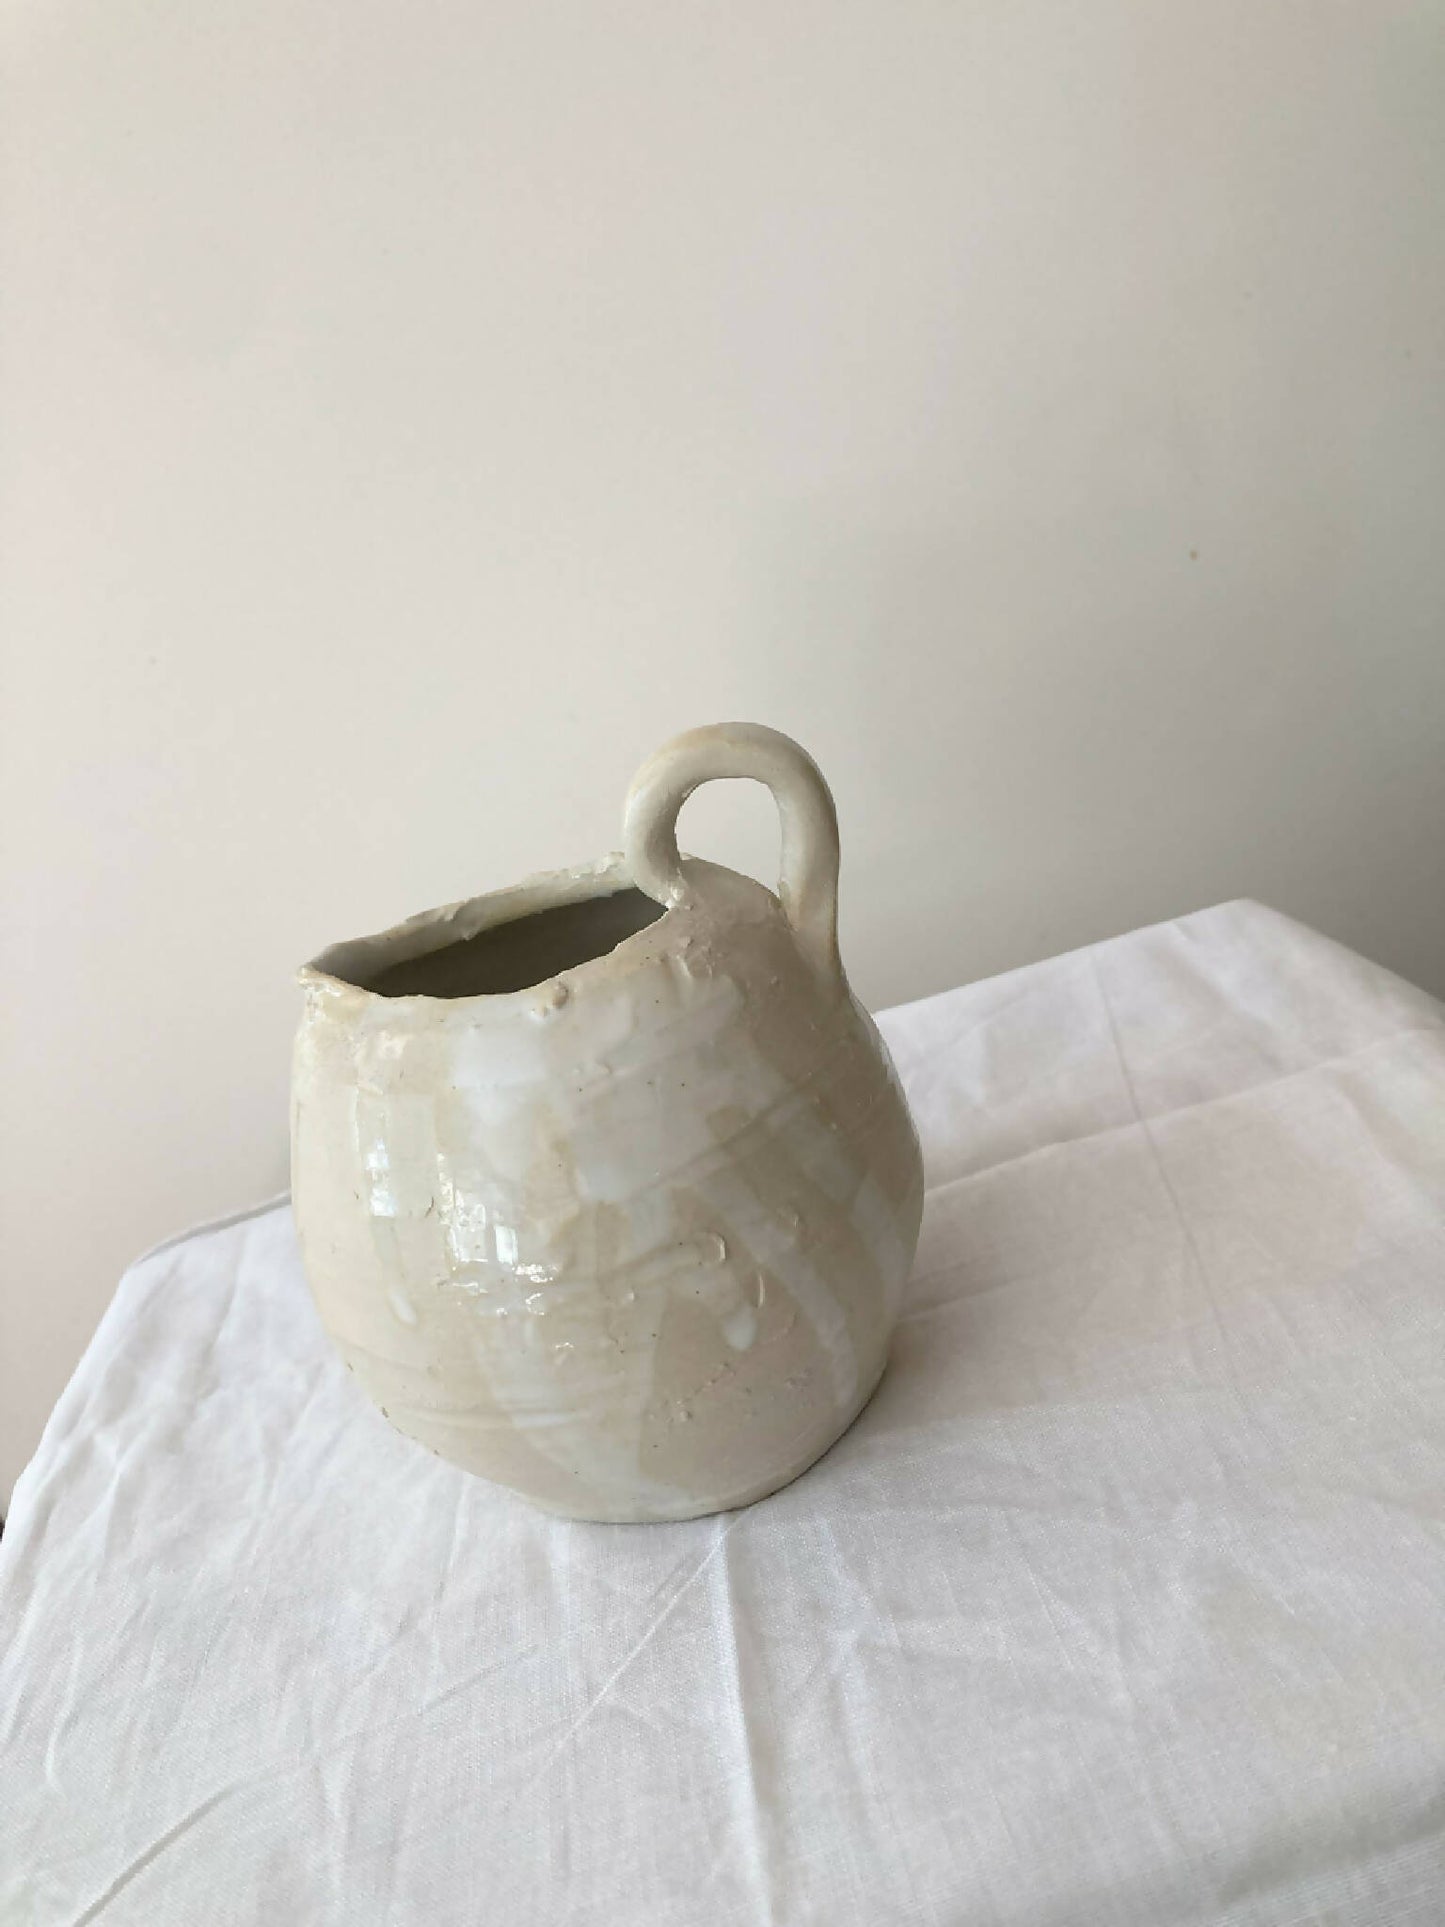 CLAY PITCHER 11.01